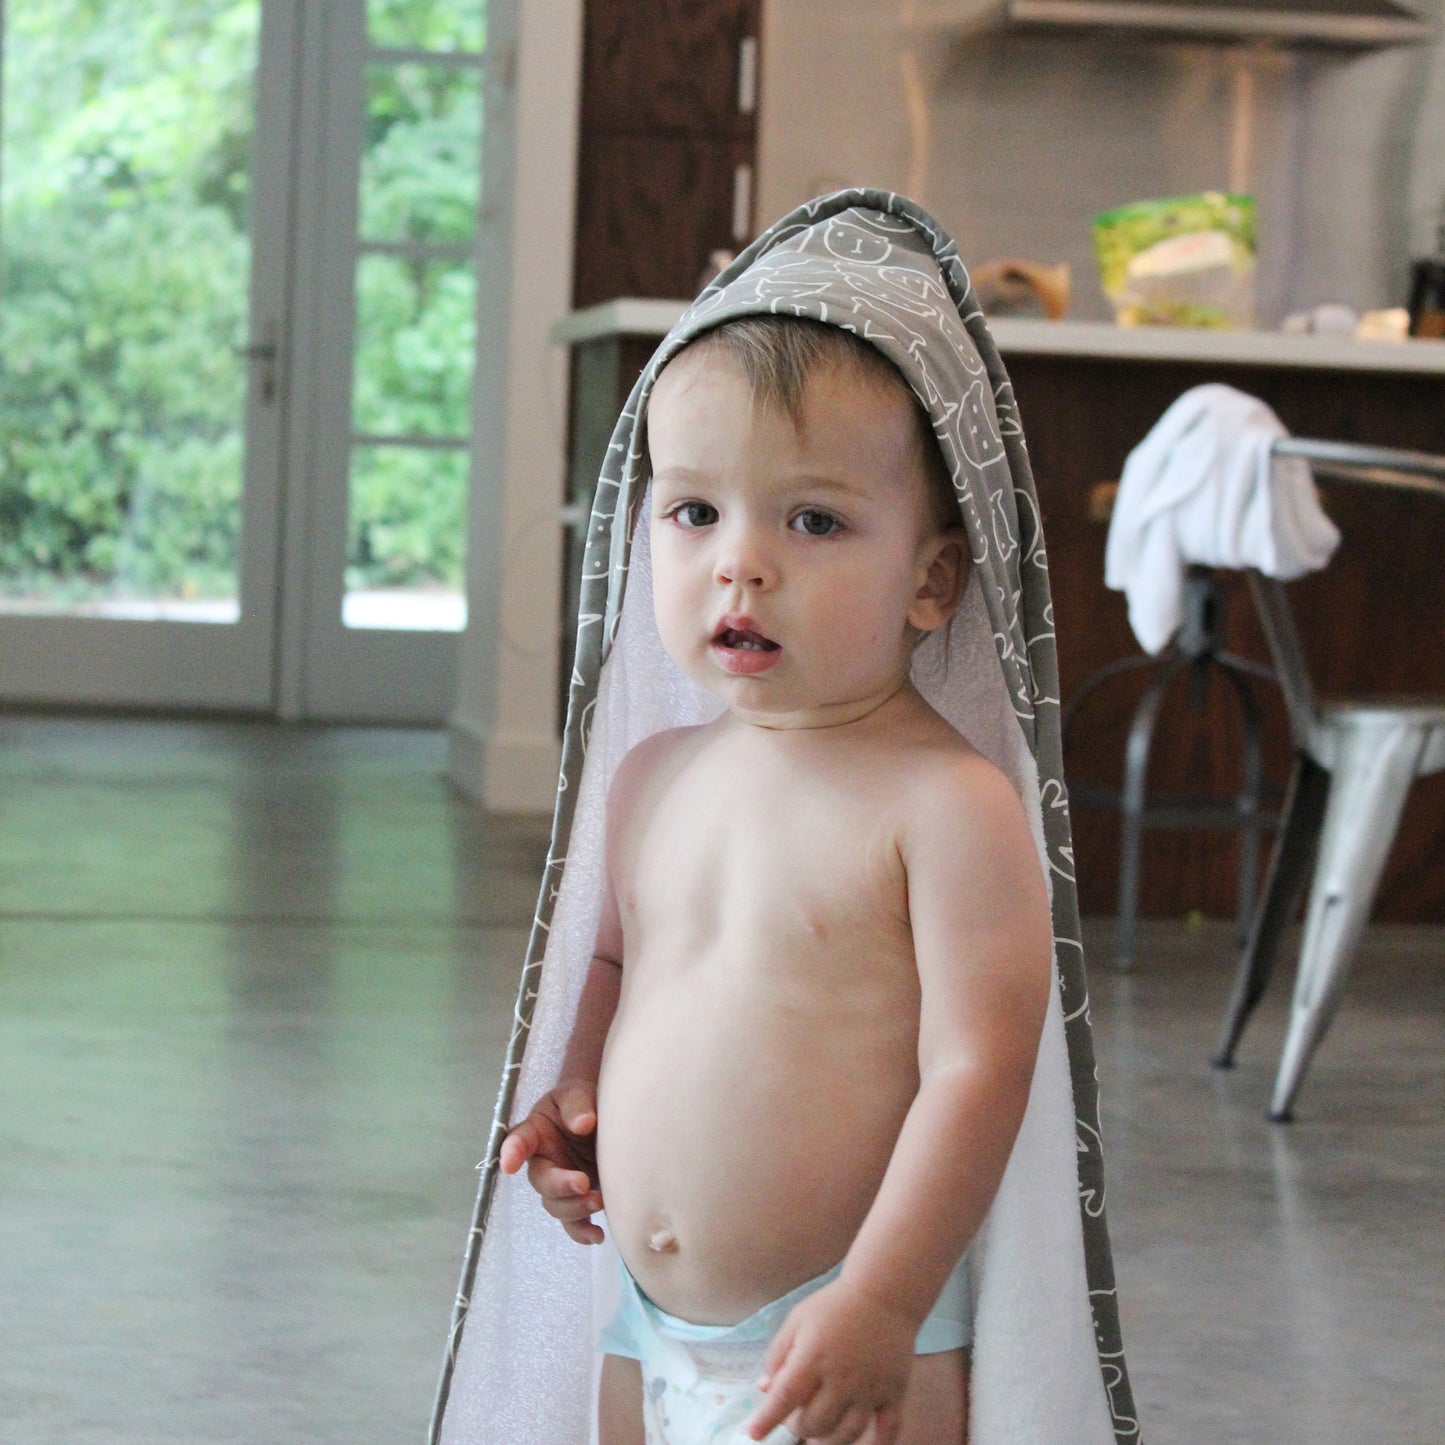 Sew with HaberdasheryFun! Simple and easy baby towel tutorial and free hood pattern piece.